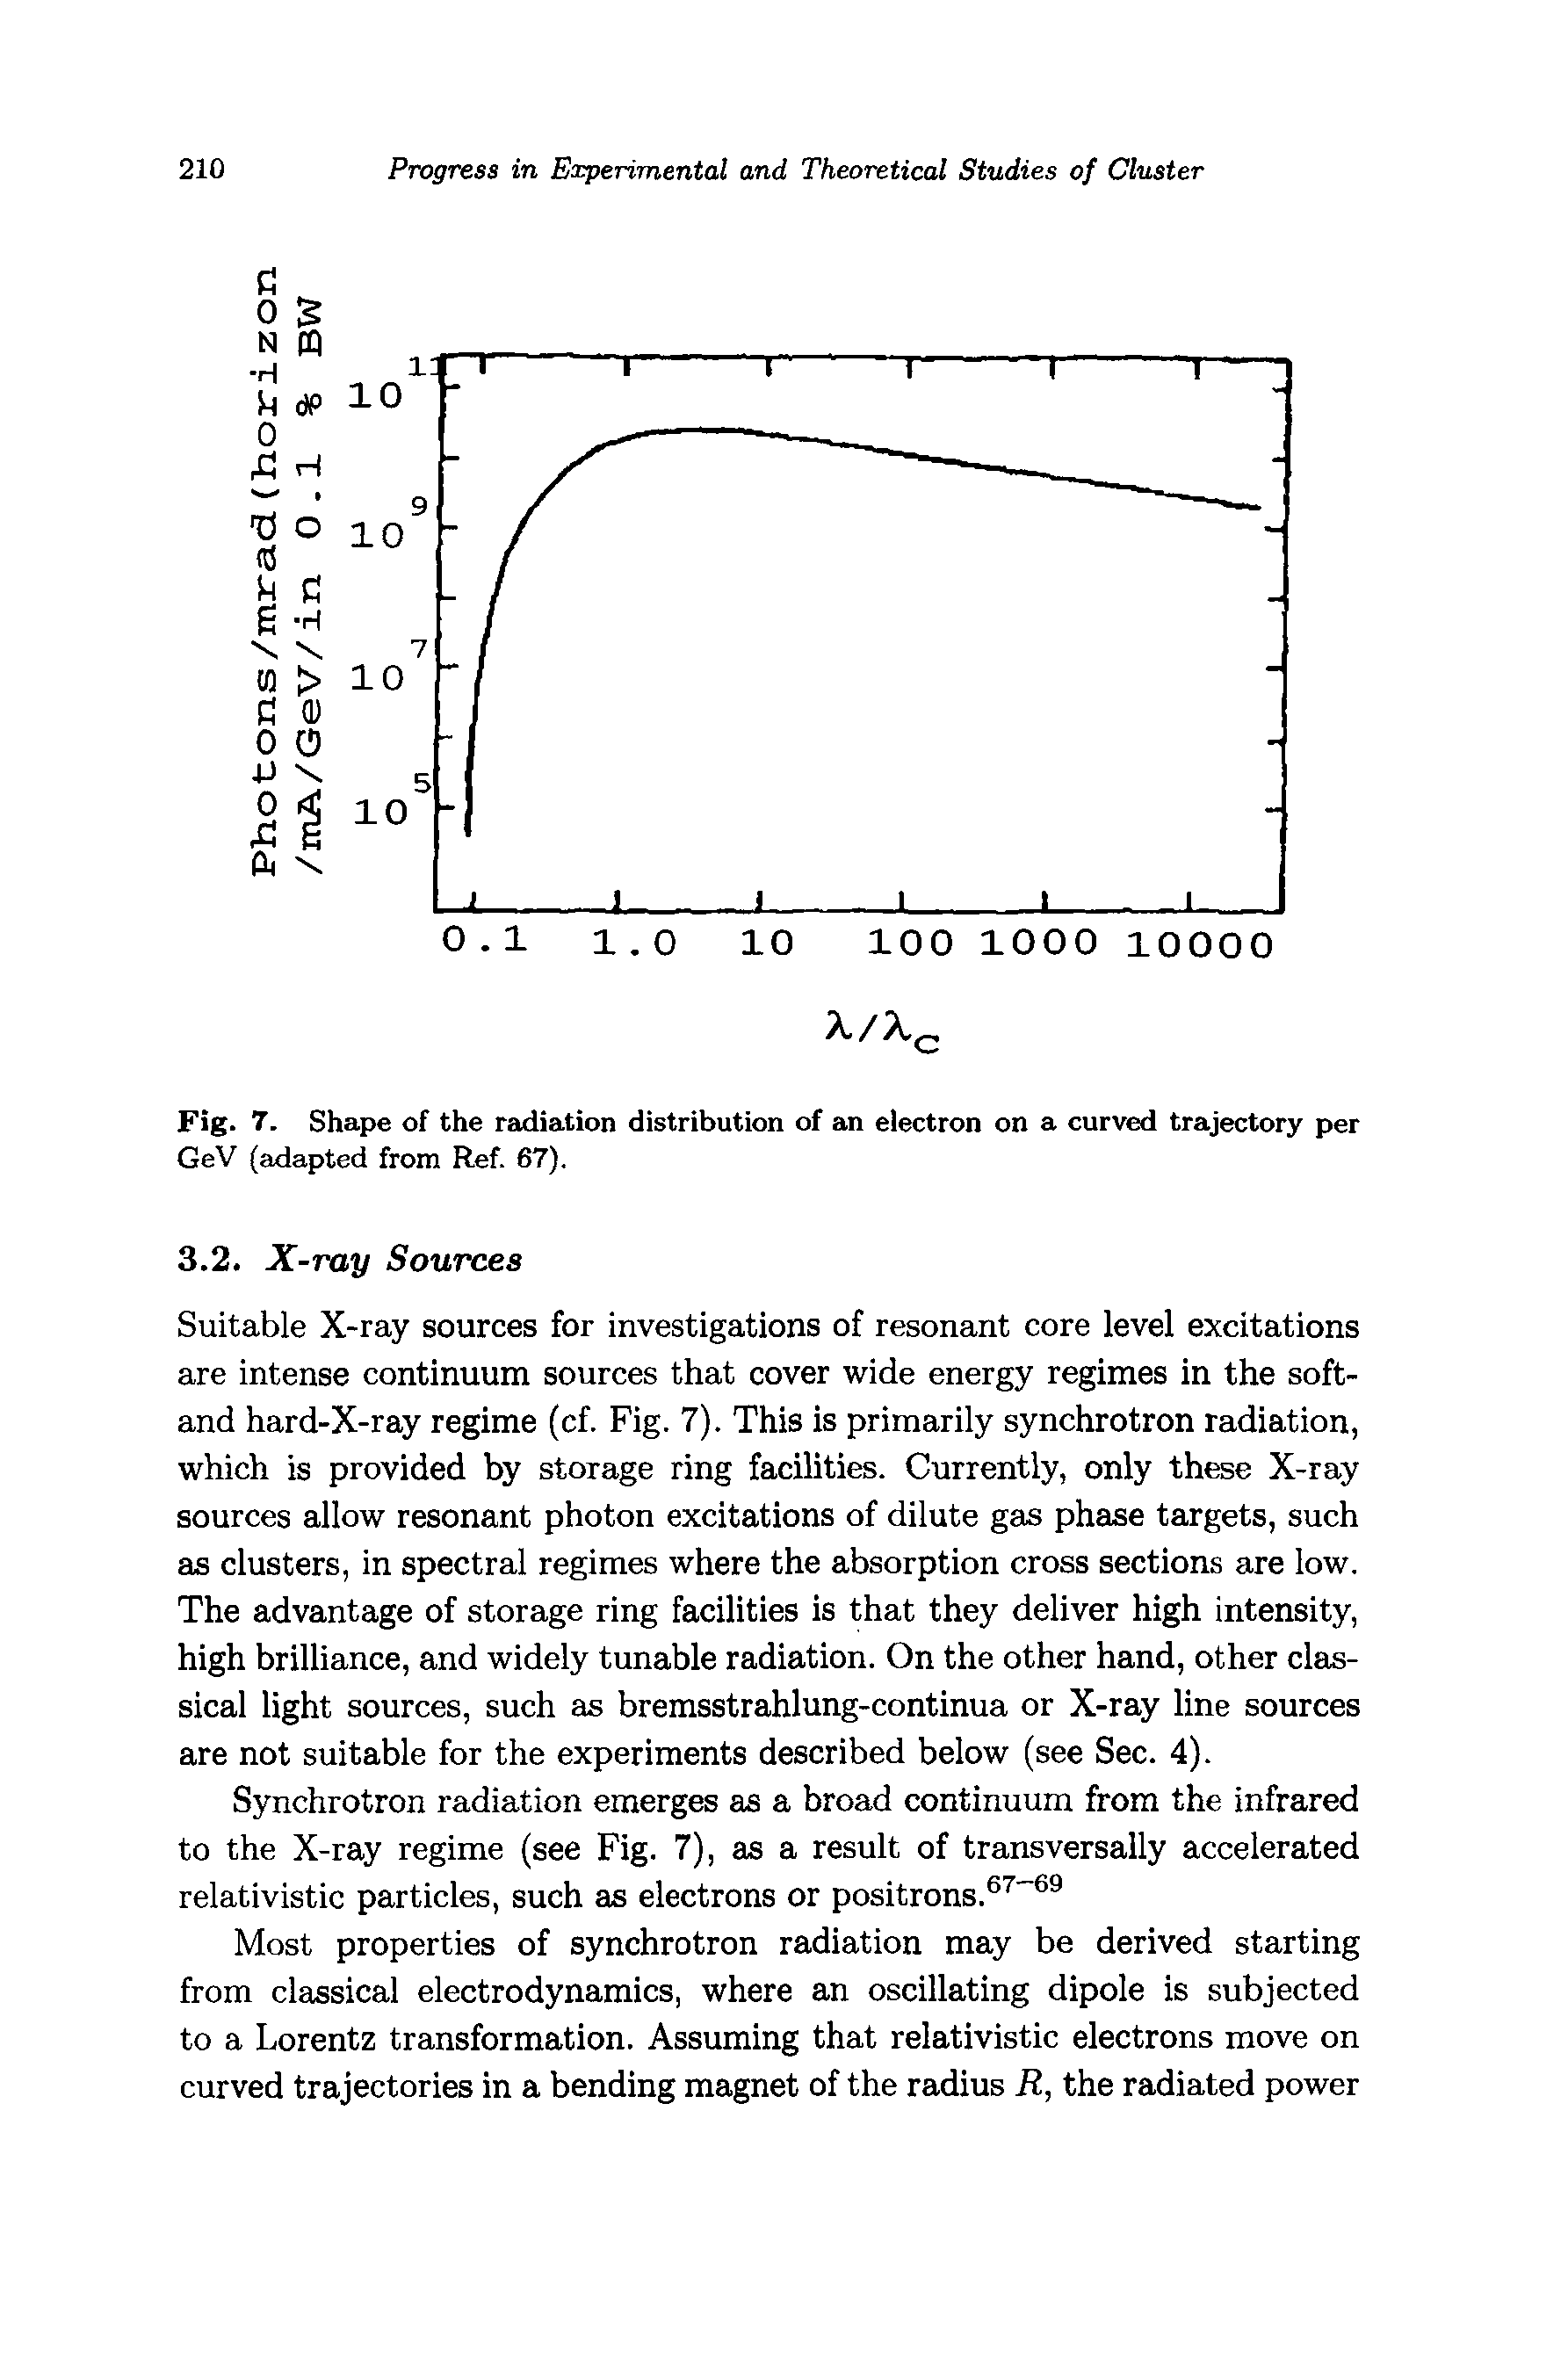 Fig. 7. Shape of the radiation distribution of an electron on a curved trajectory per GeV (adapted from Ref. 67).